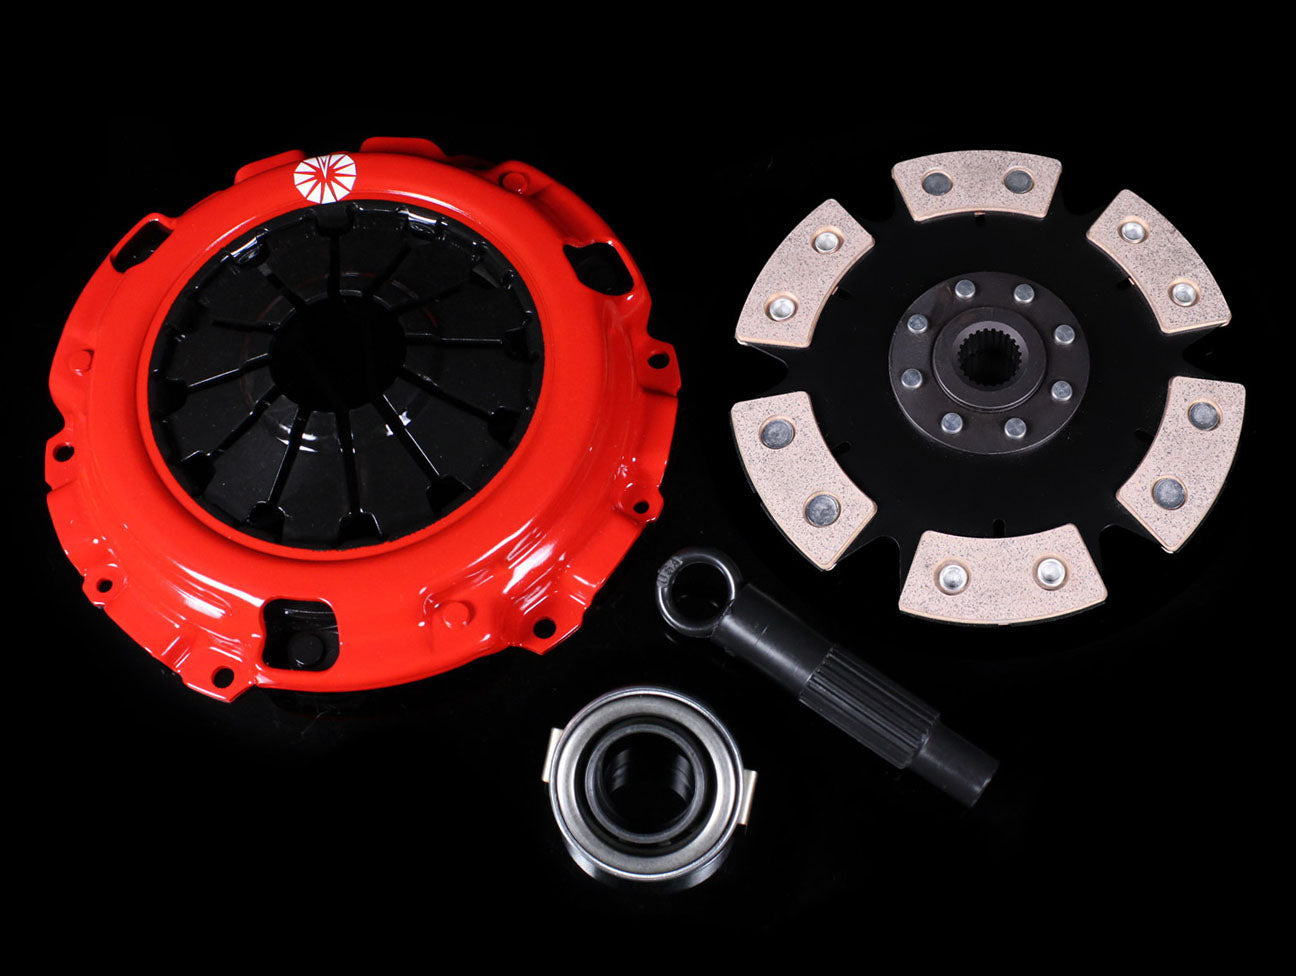 Action Clutch Stage 4 1MD Clutch Kit - B-Series